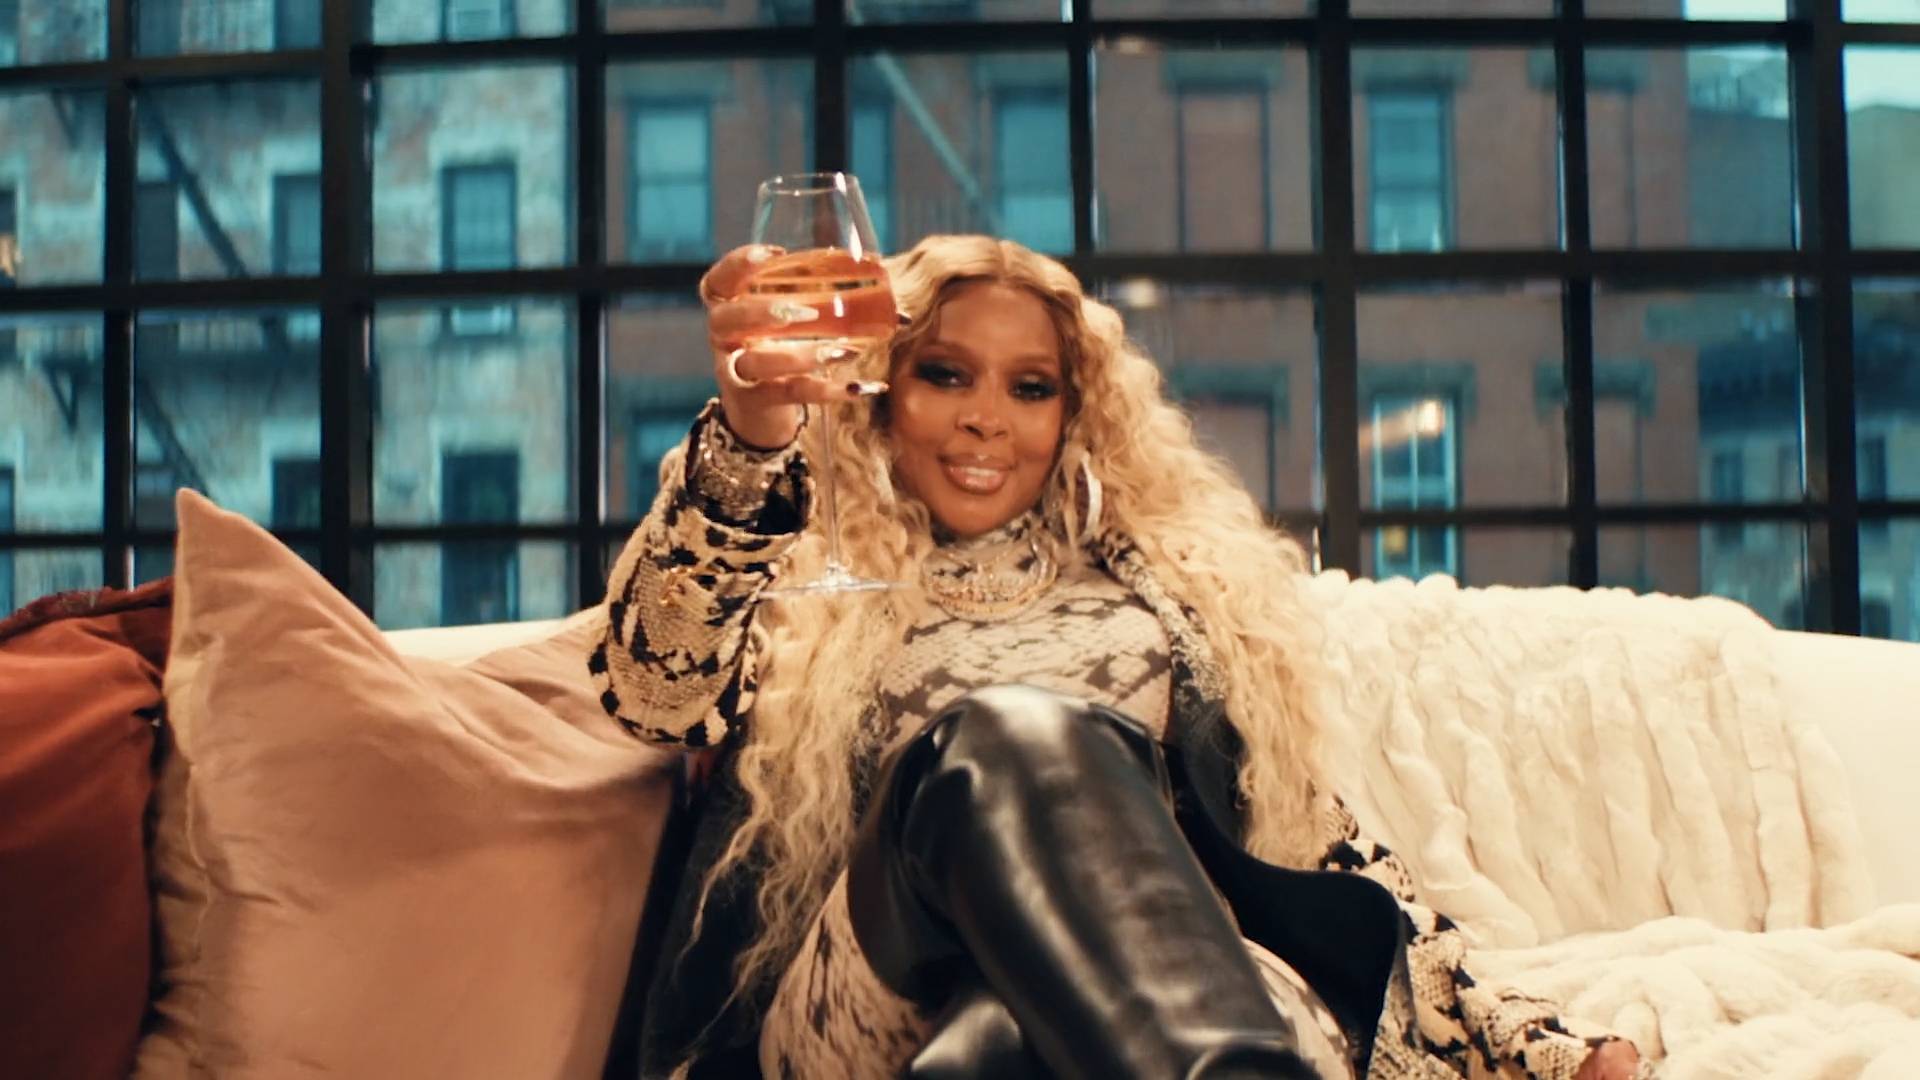 First Look Trailer: Mary J. Blige’s BET Talk Show ‘The Wine Down’ [Watch]